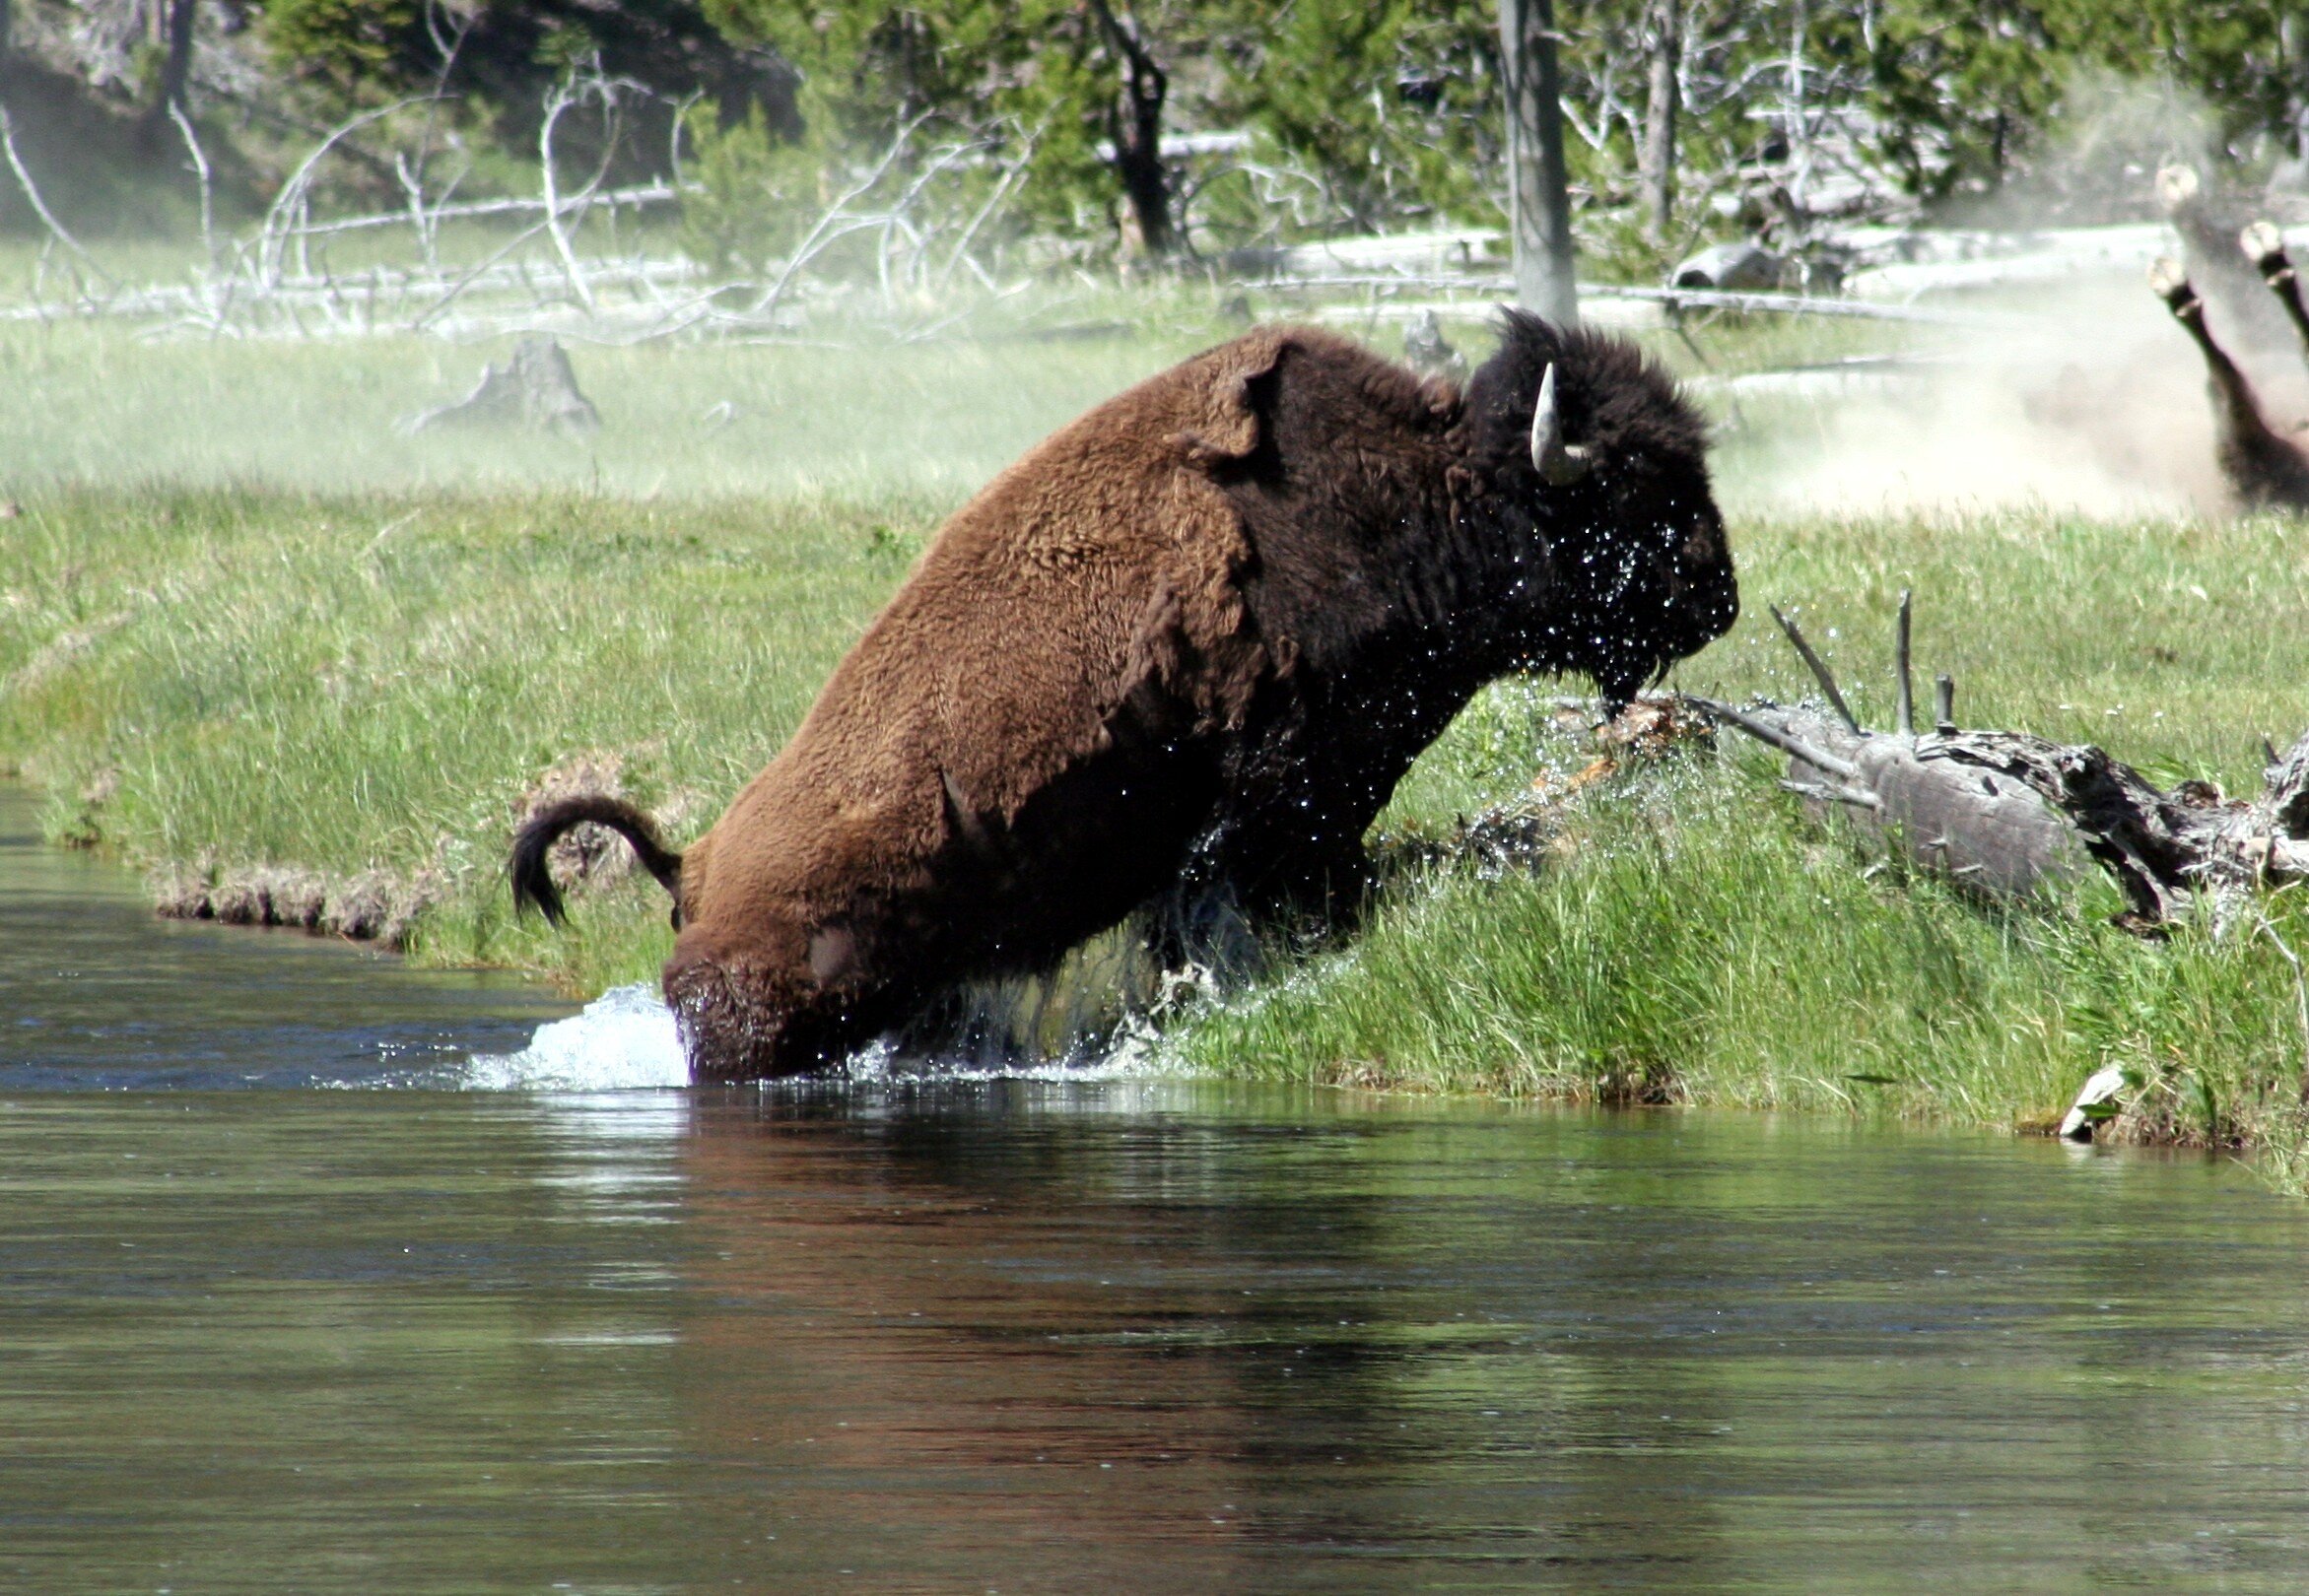 Bison Coming out of River - 01.jpg